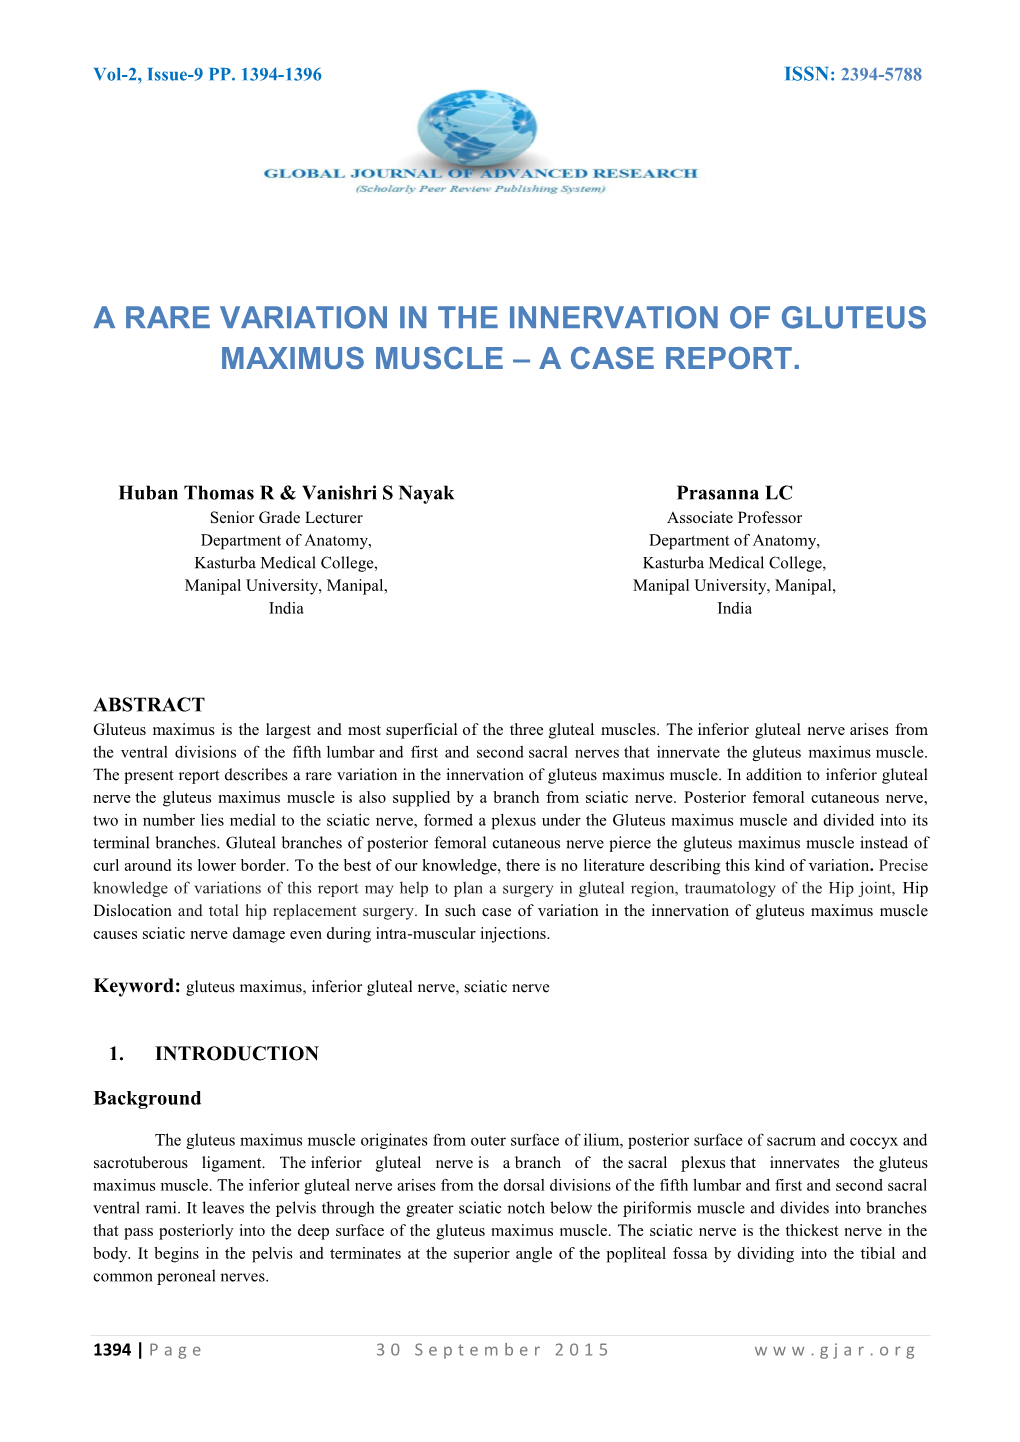 A Rare Variation in the Innervation of Gluteus Maximus Muscle – a Case Report